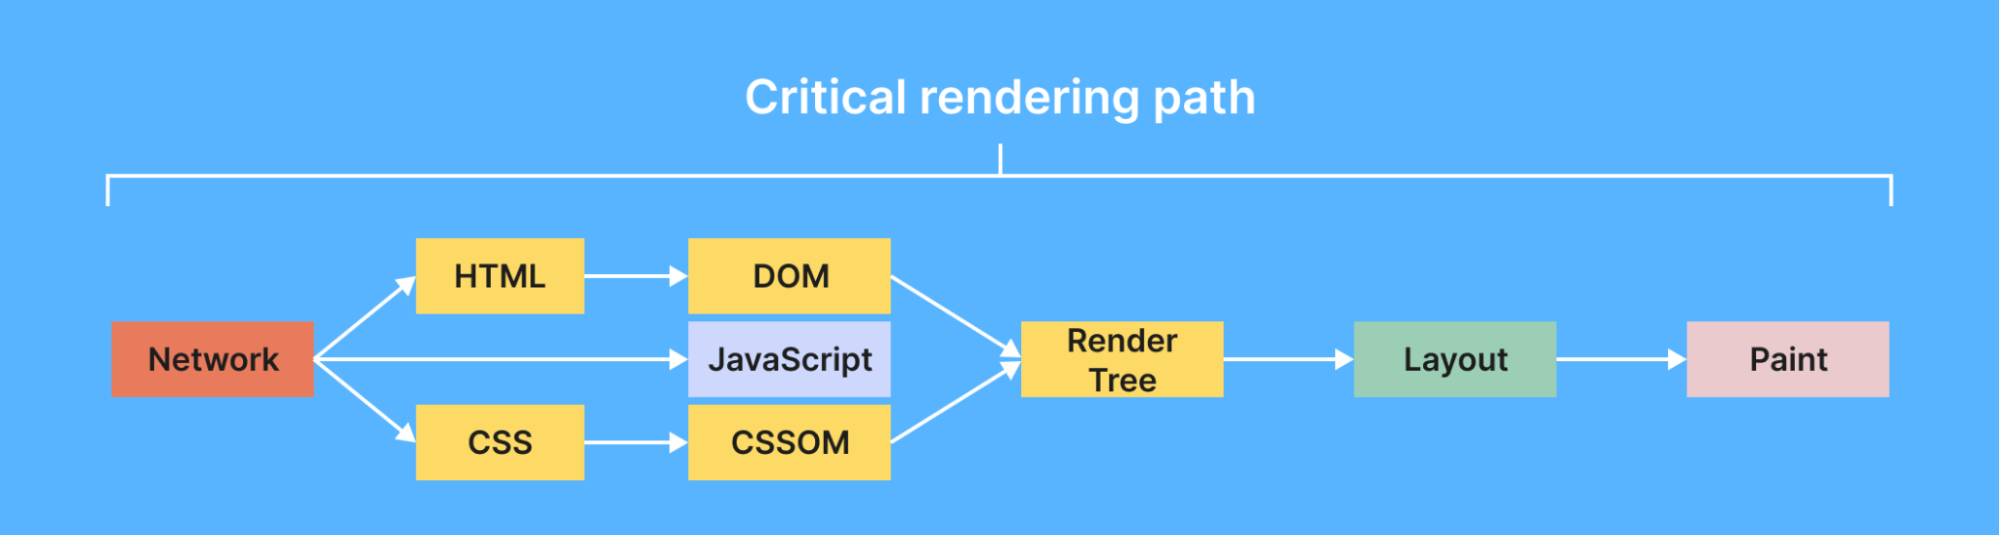 critical rendering path